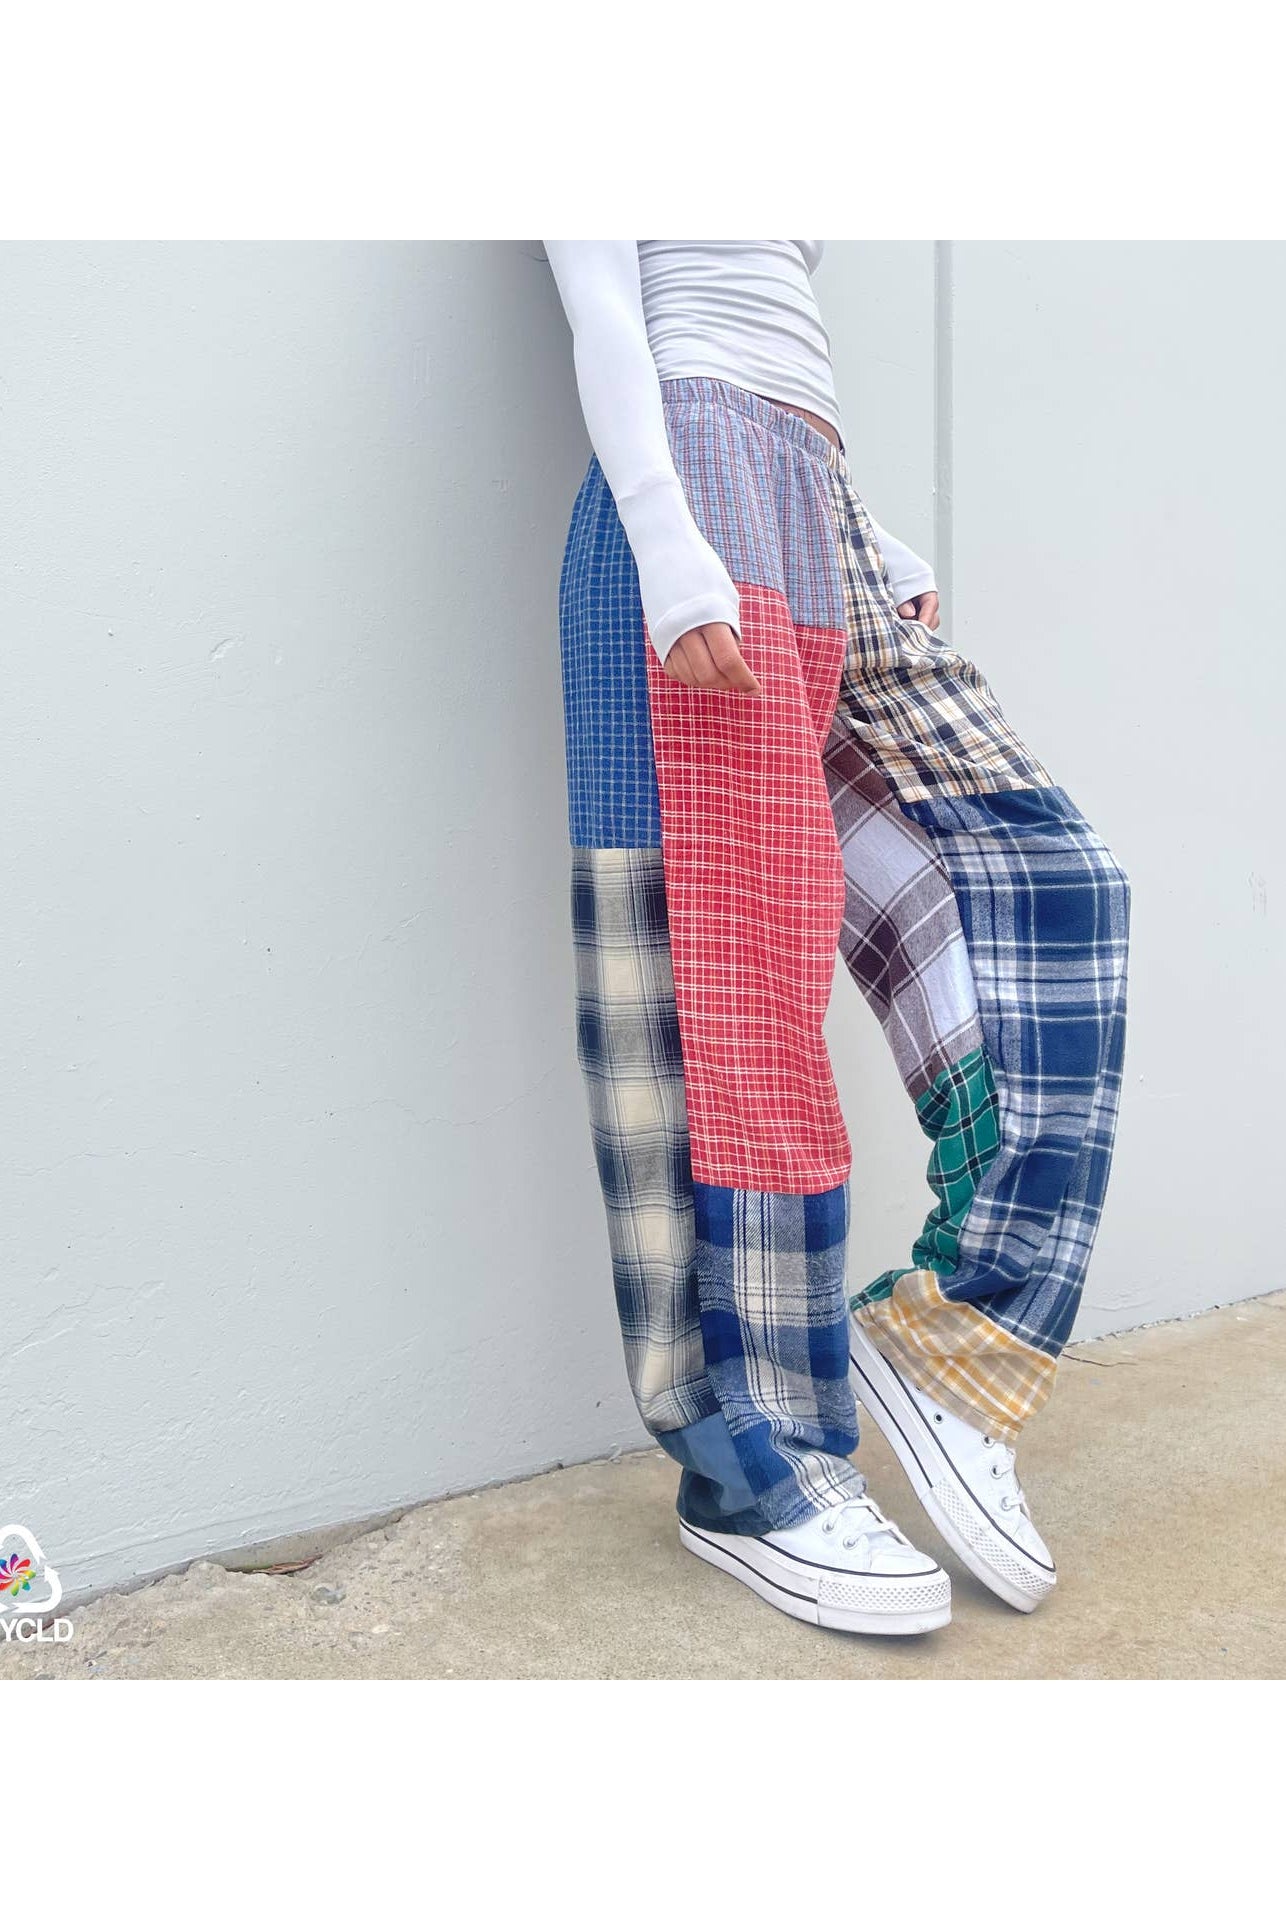 
  
  Pieced Flannel Pants
  
